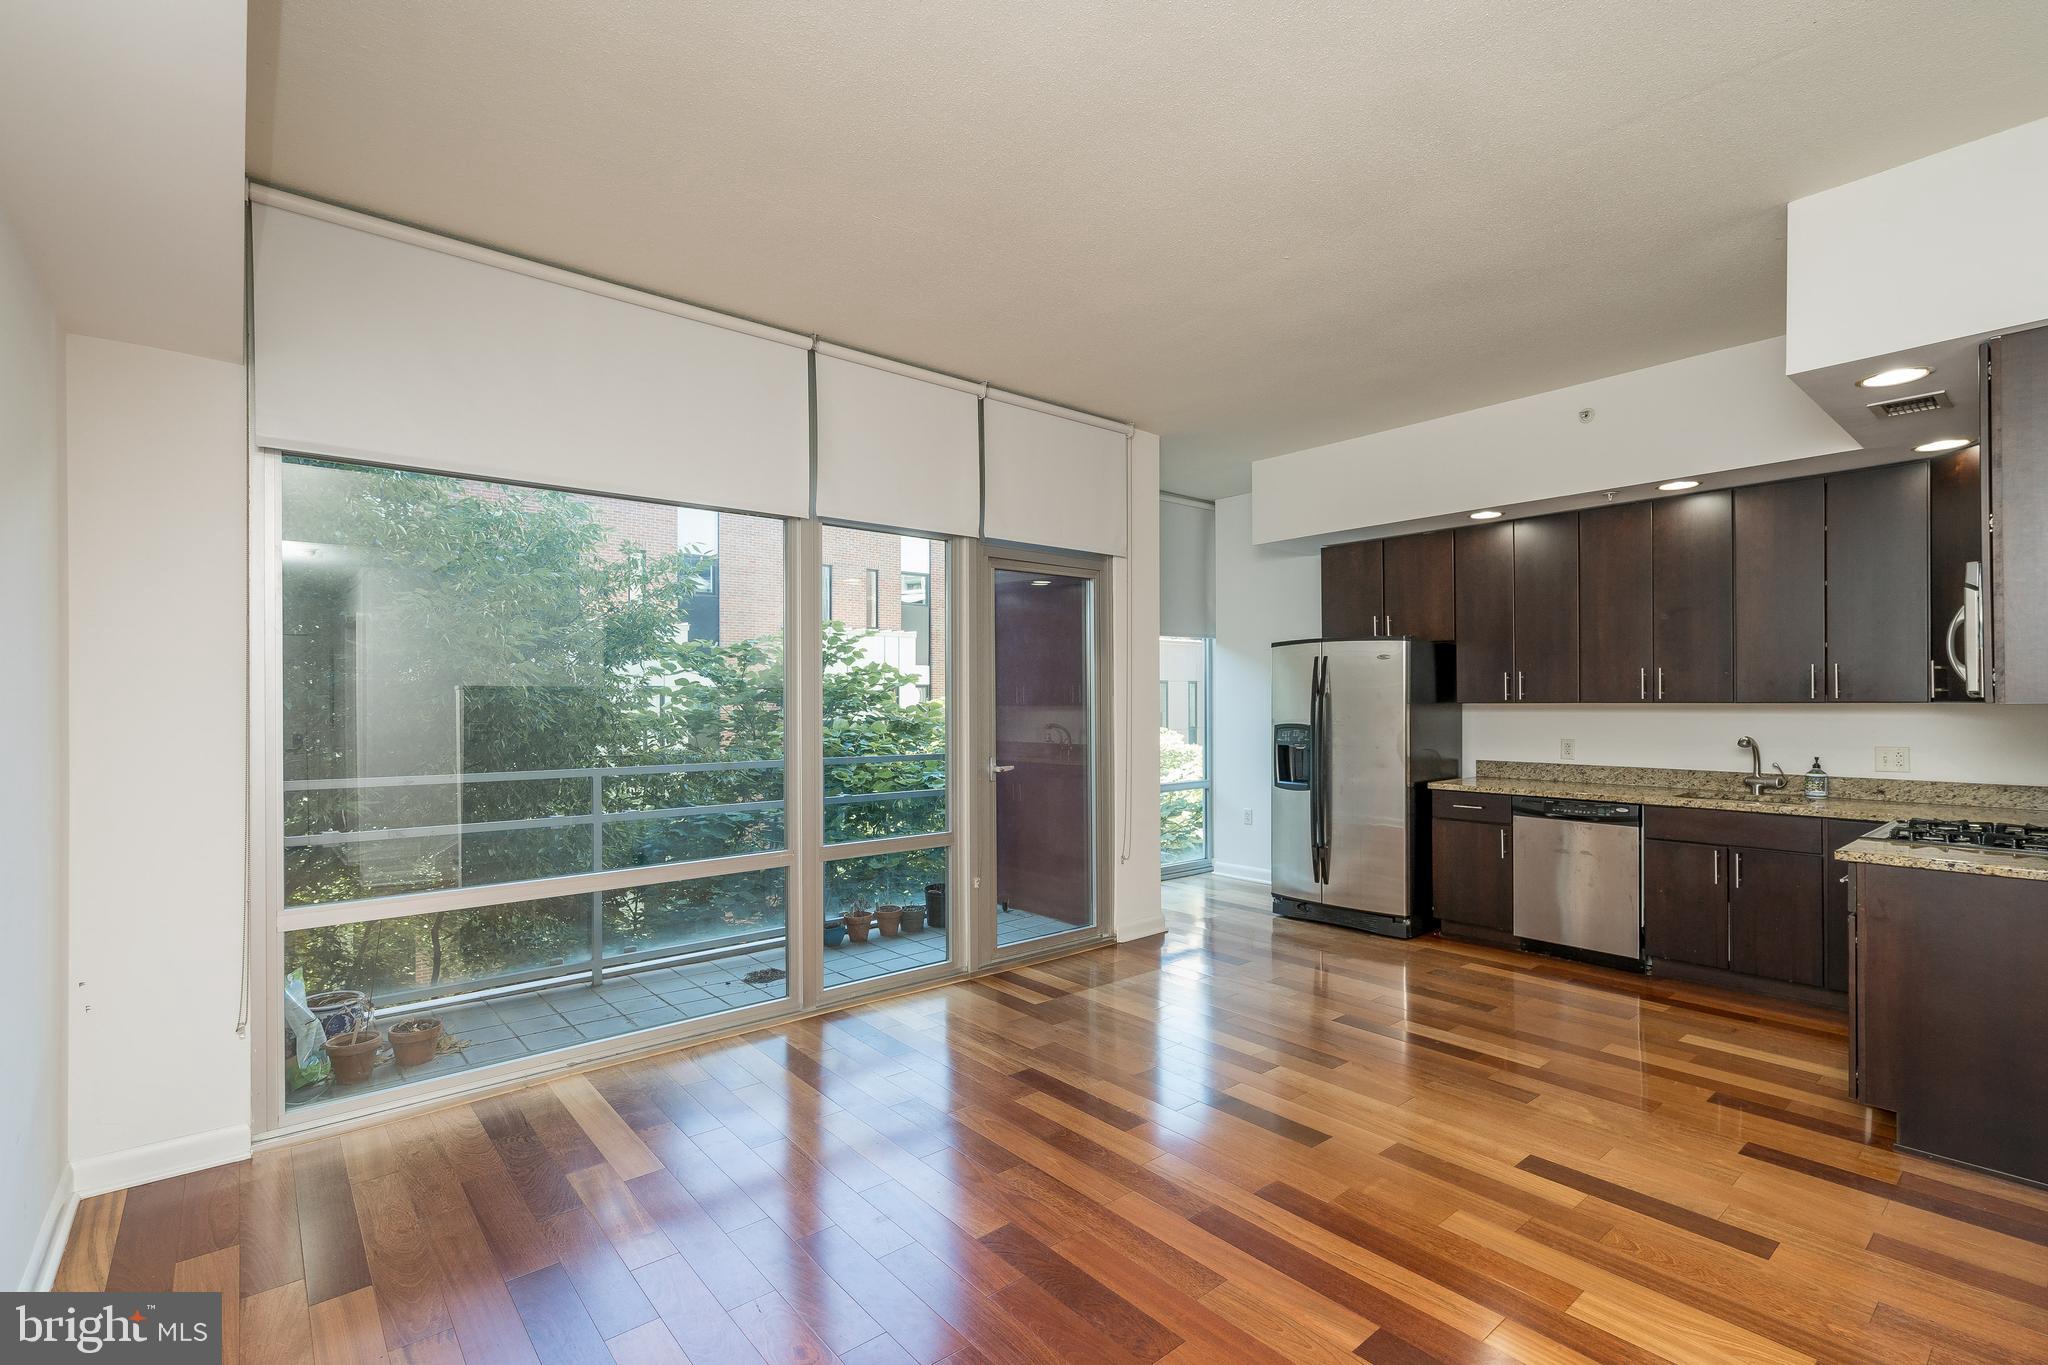 a kitchen with stainless steel appliances wooden floor and a large window